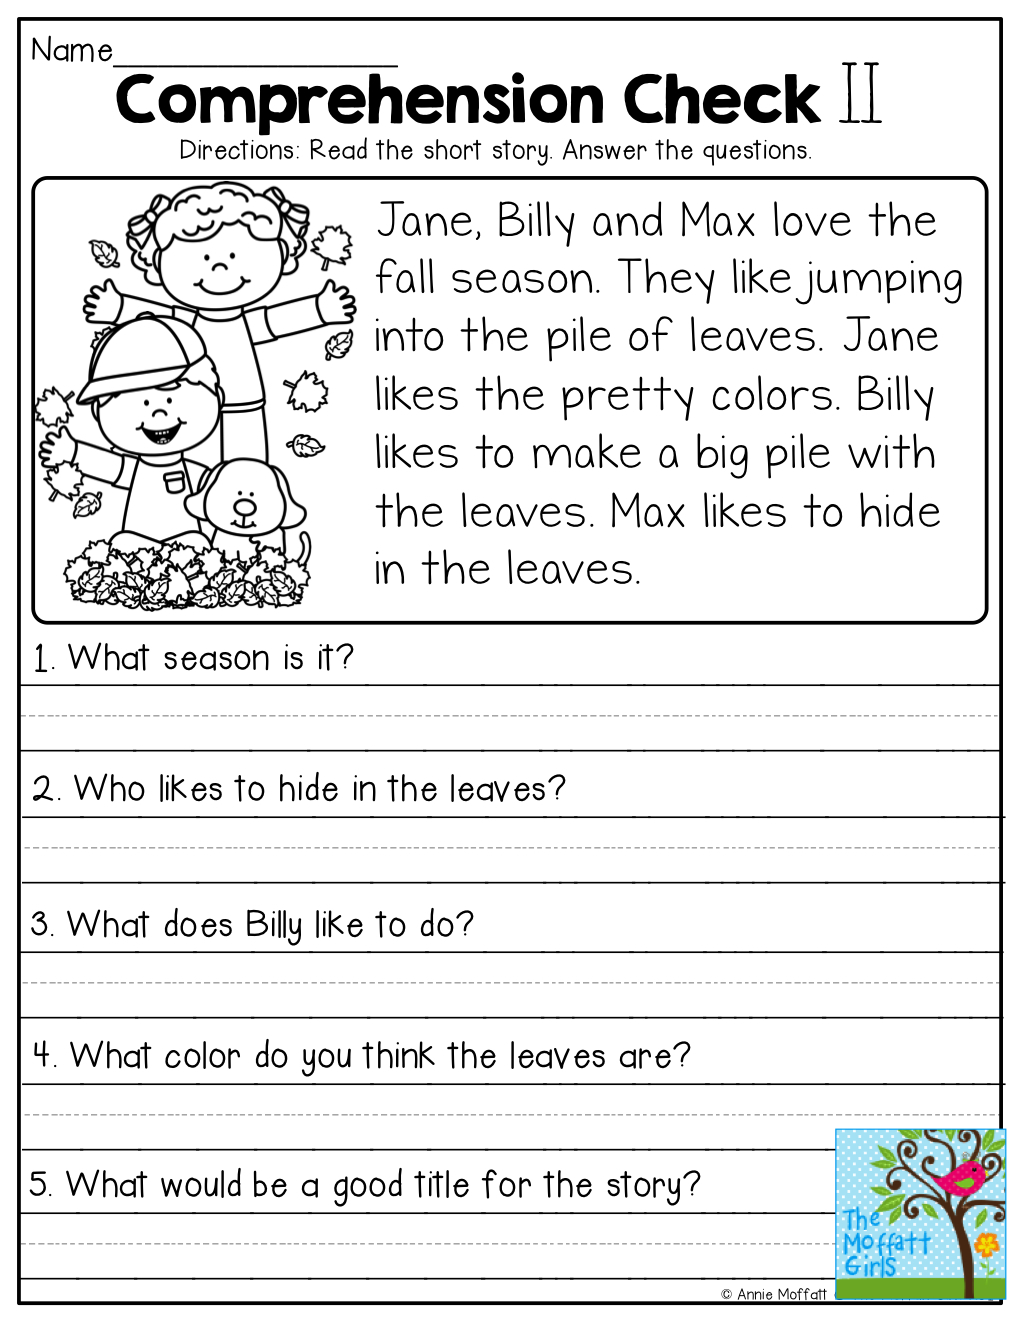 Comprehension Checks And So Many More Useful Printables! | Test Of | Free Printable Comprehension Worksheets For Grade 5